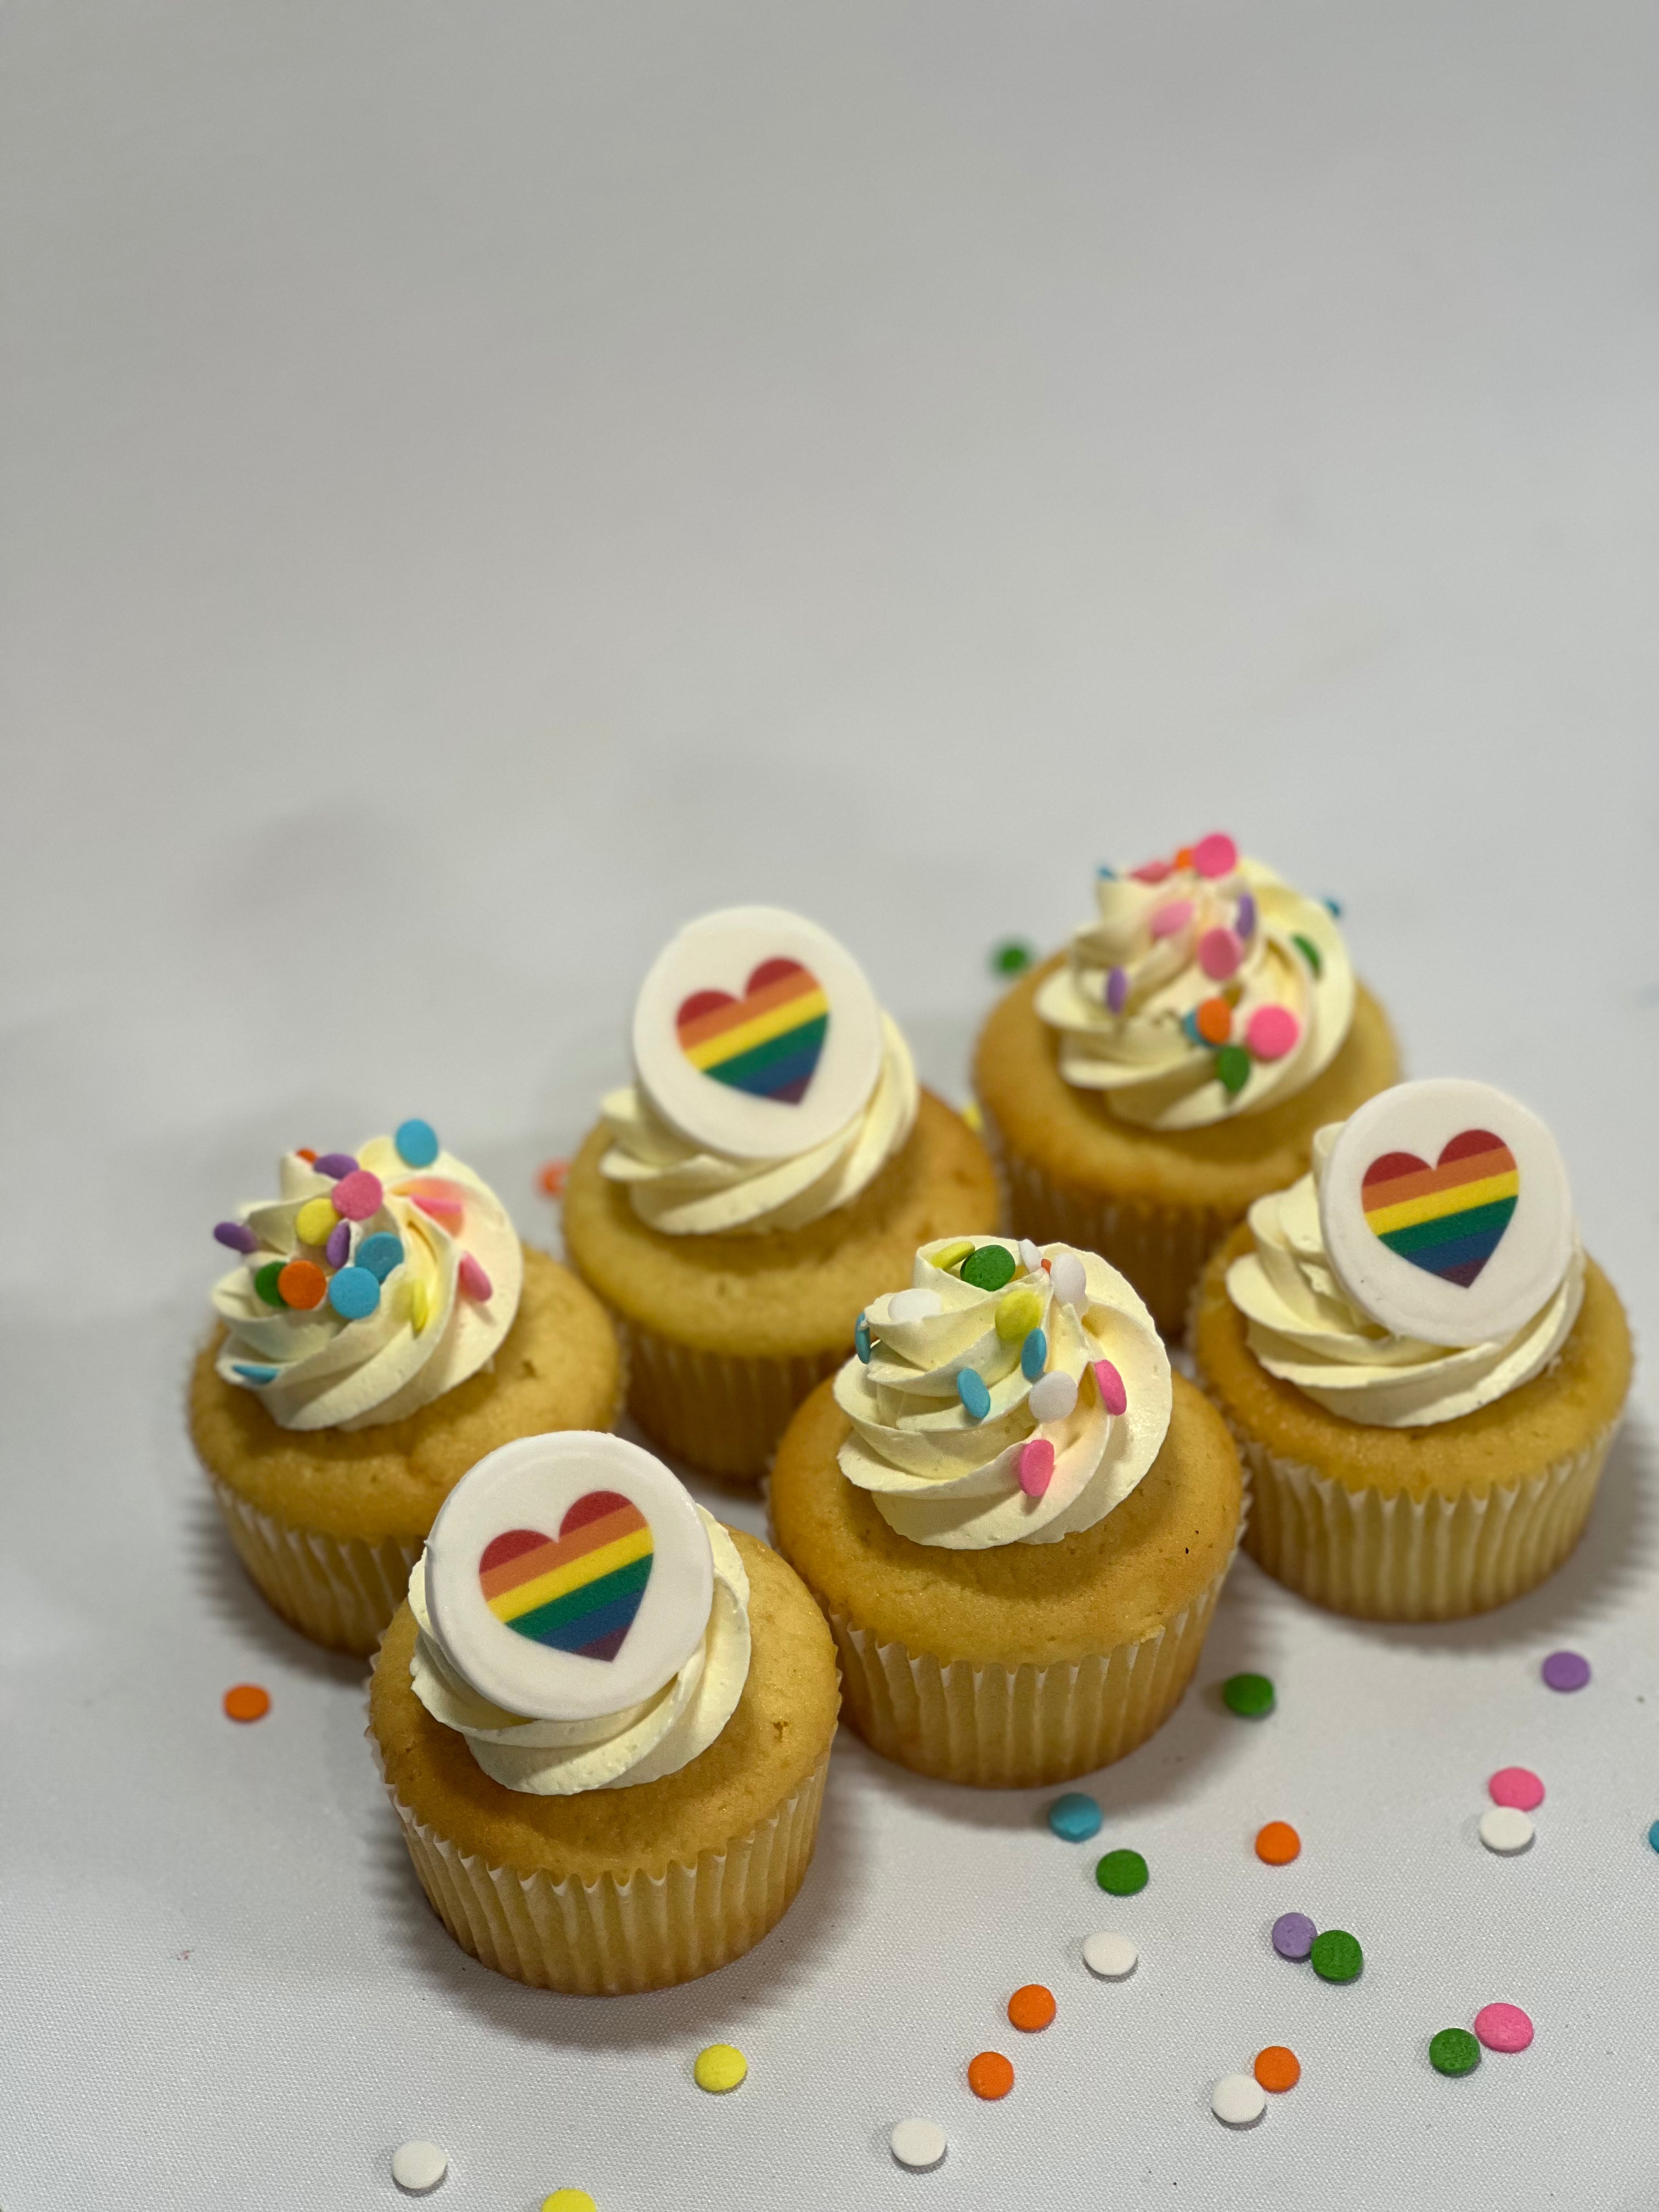 PRIDE themed Cupcakes